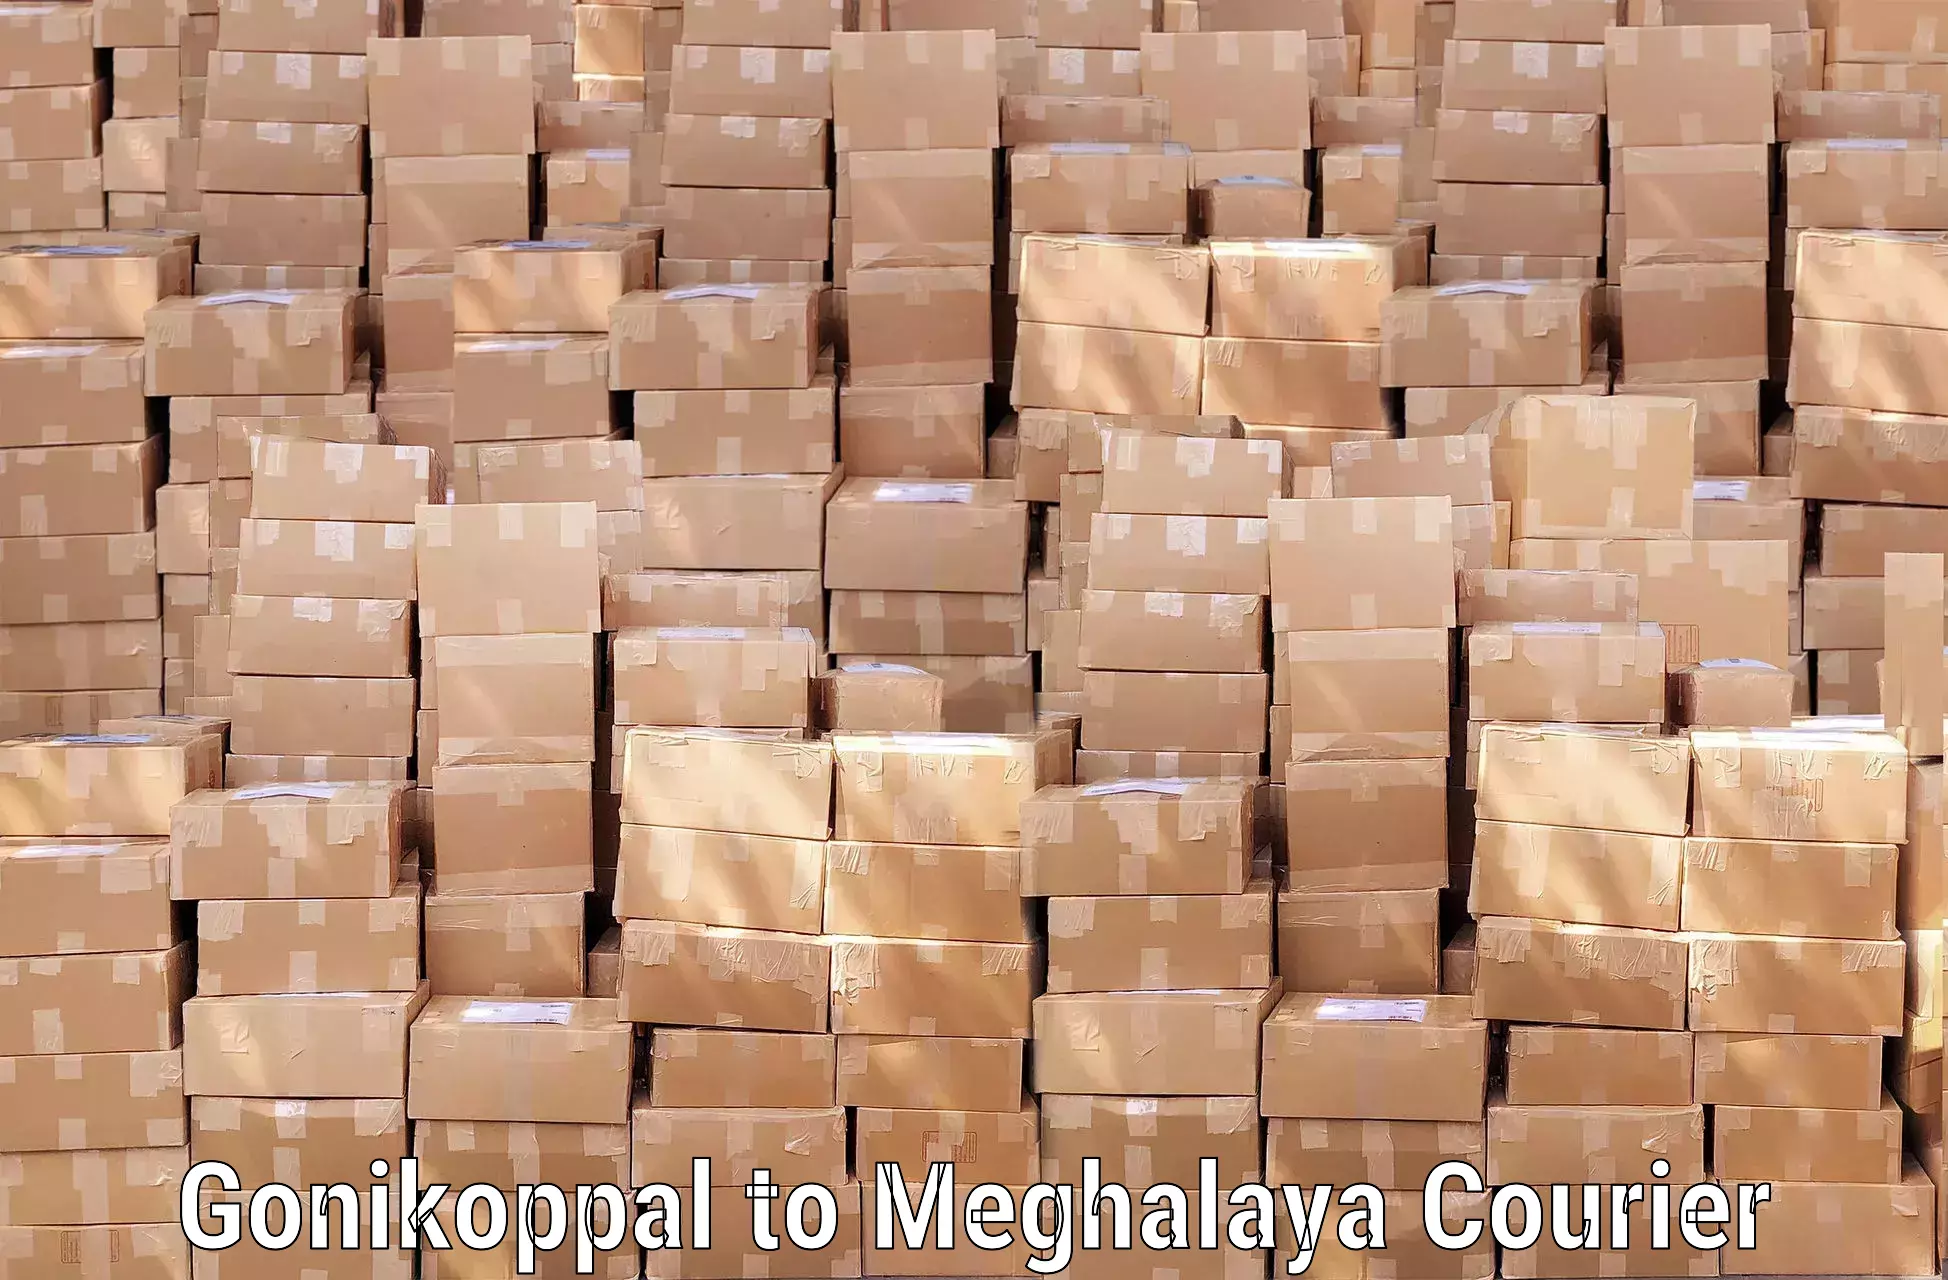 Baggage relocation service in Gonikoppal to Meghalaya